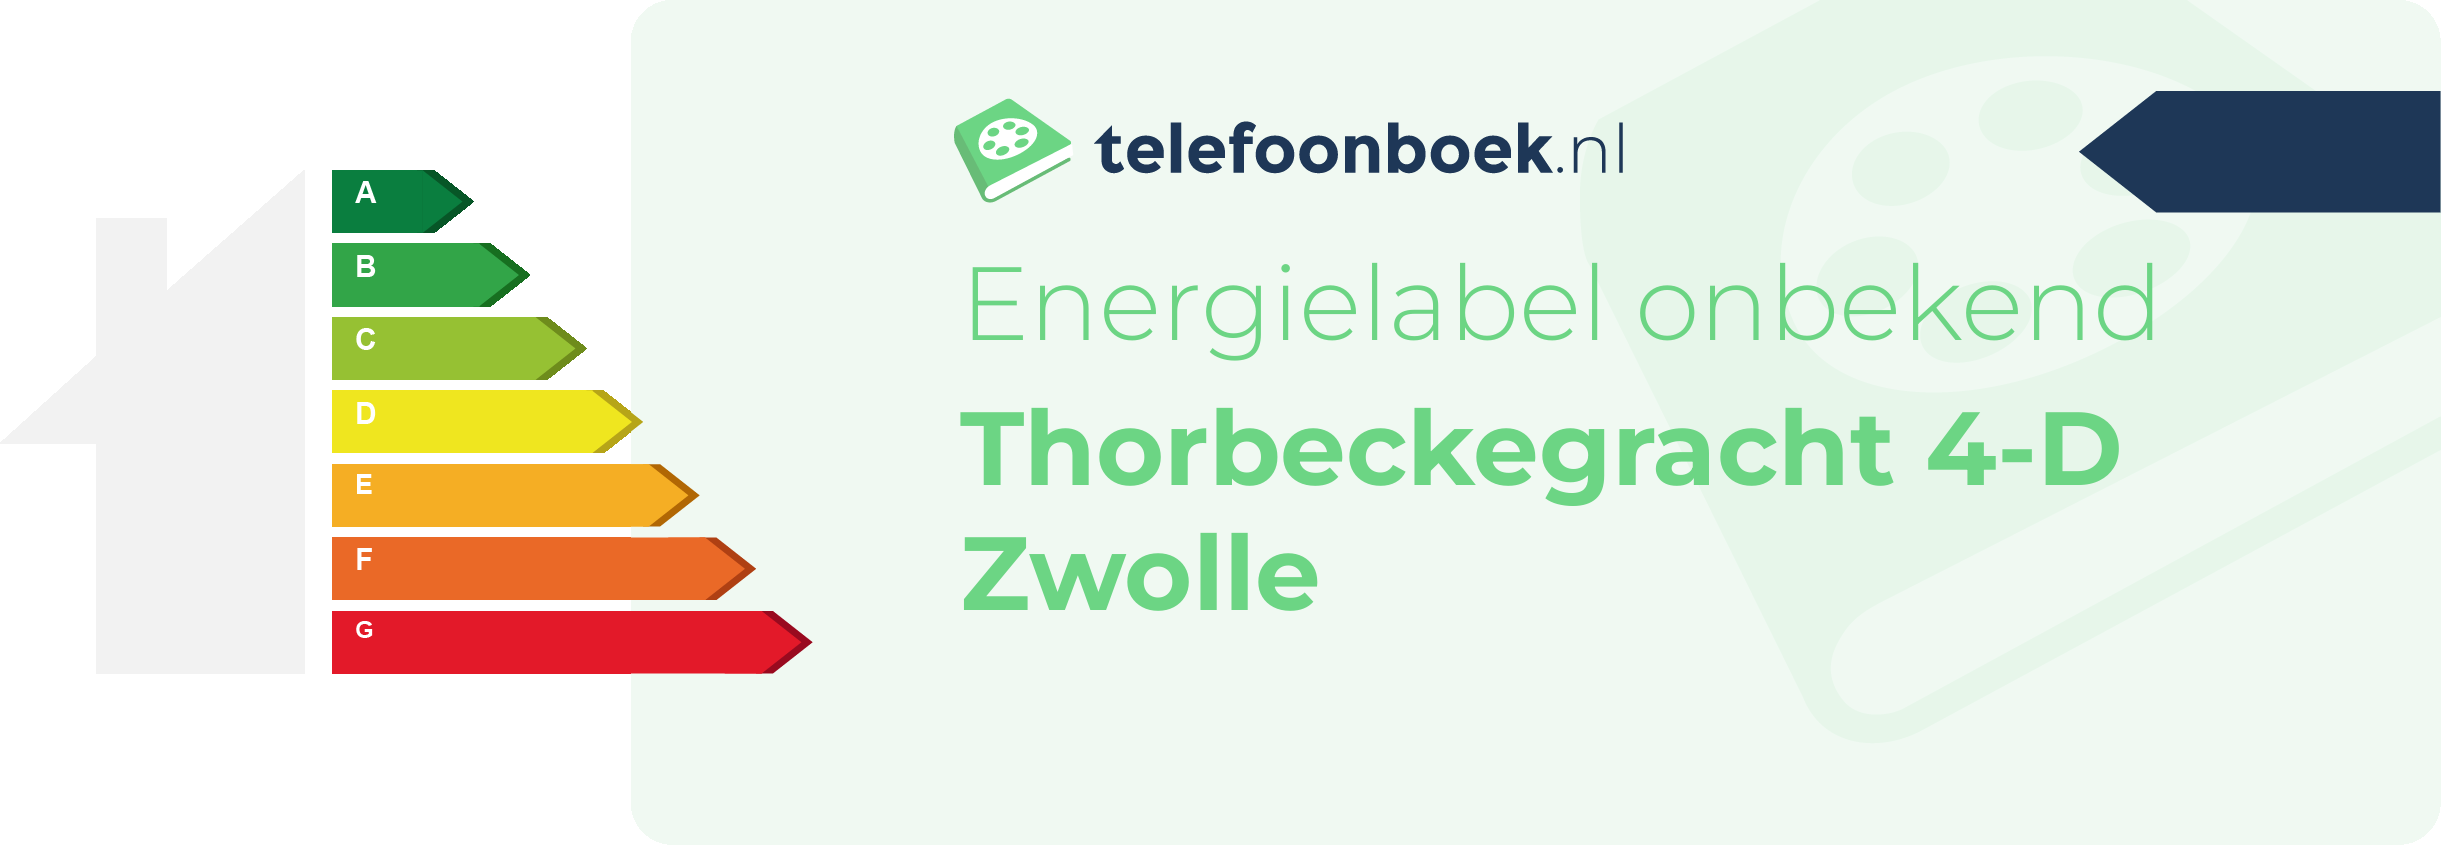 Energielabel Thorbeckegracht 4-D Zwolle